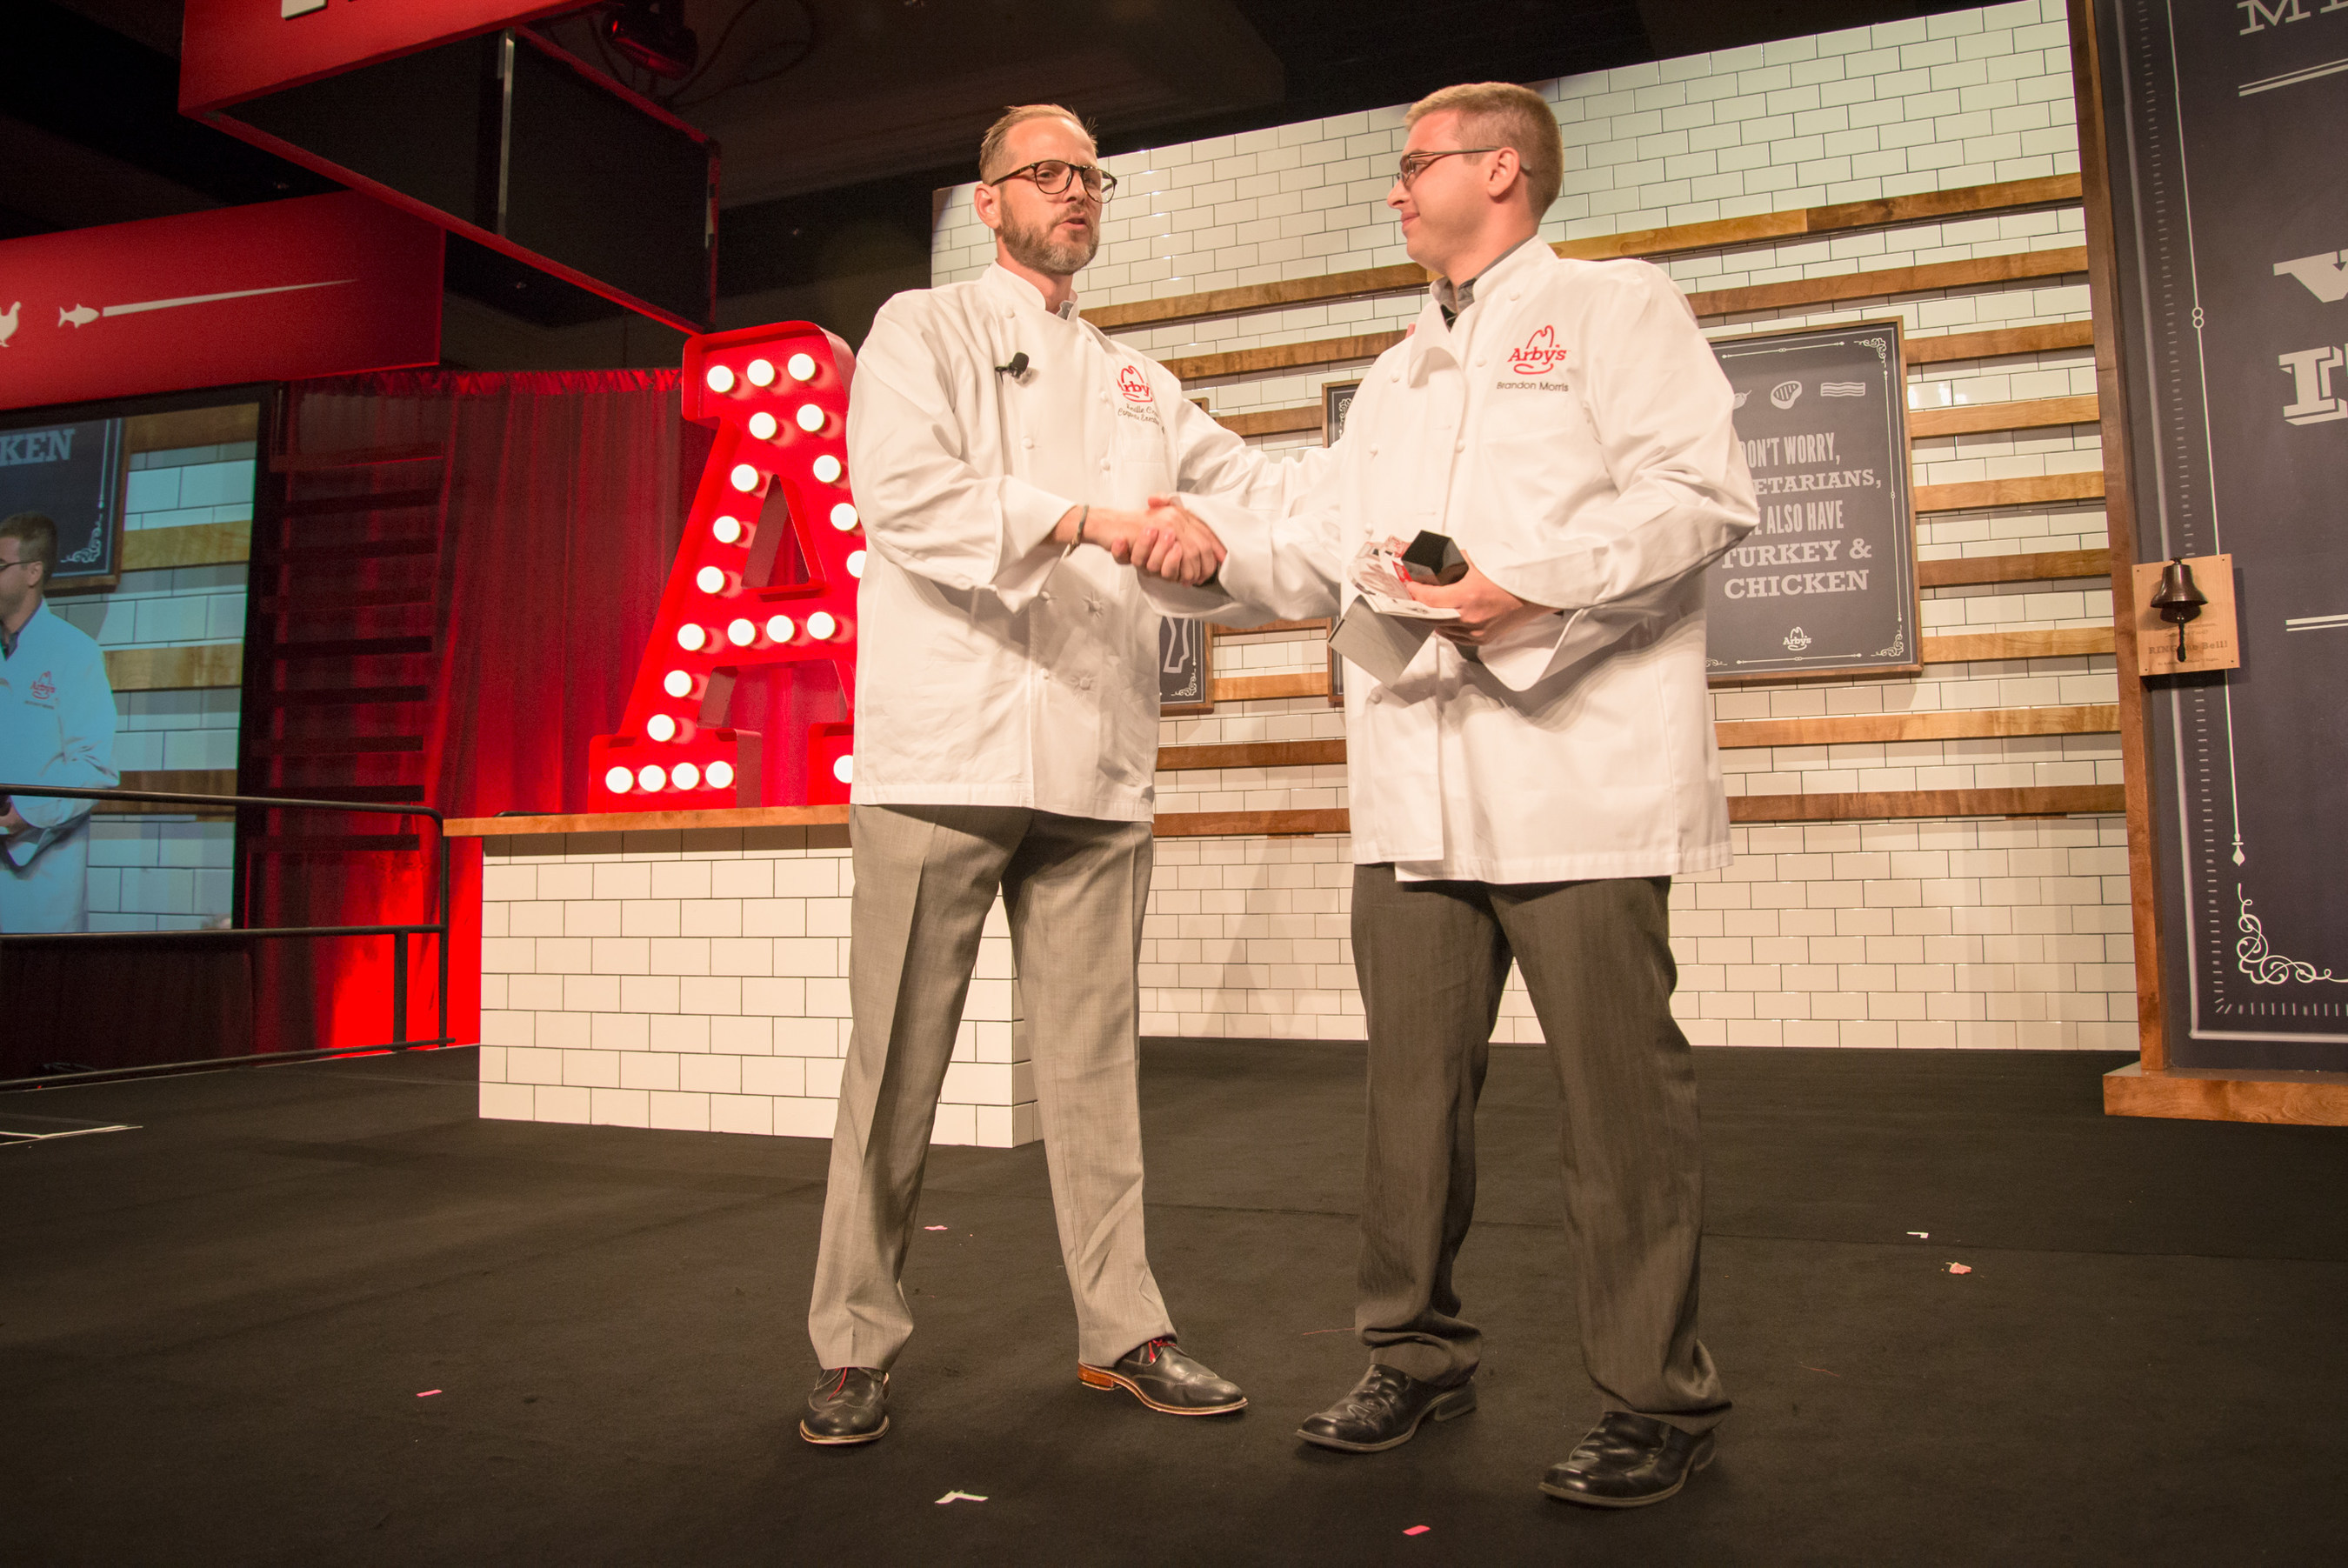 Arby's Corporate Executive Chef, Neville Craw (left), presents the Hey Chef Neville! award to team member, Brandon Morris (right), of Danville, Kentucky at Arby's 2014 Worldwide Franchise Convention in Las Vegas. Morris submitted the winning idea for the King's Hawaiian Fish Deluxe Sandwich, which is being featured at Arby's restaurants nationwide this month as a special menu item. Morris was presented with a trophy, $1,500 check and a custom-made chef coat.